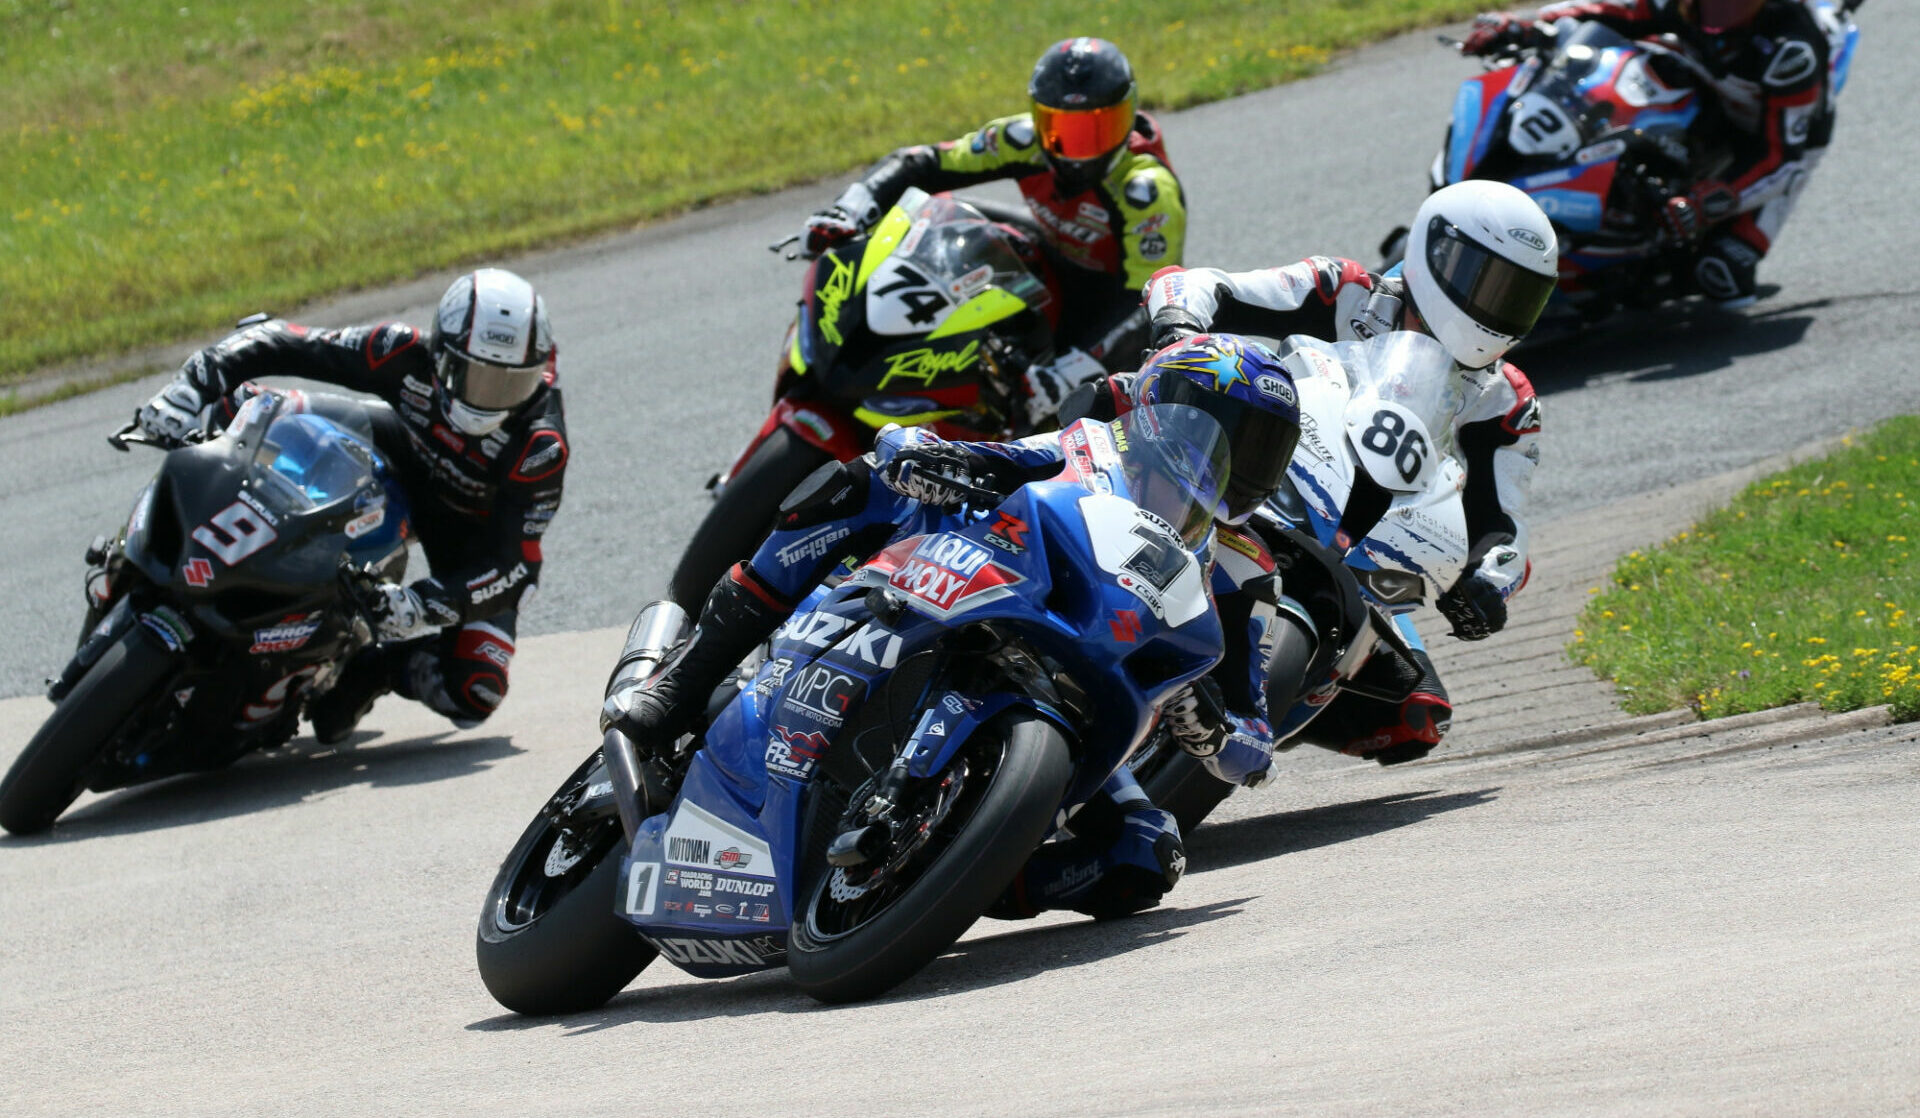 2021 Canadian Superbike Champion Alex Dumas (1) leads eventual 2022 Champion Ben Young (86), Trevor Daley (9), Michael Leon (74), and Samuel Guerin (2) at Atlantic Motorsport Park in 2022. Photo by Rob O'Brien, courtesy CSBK.